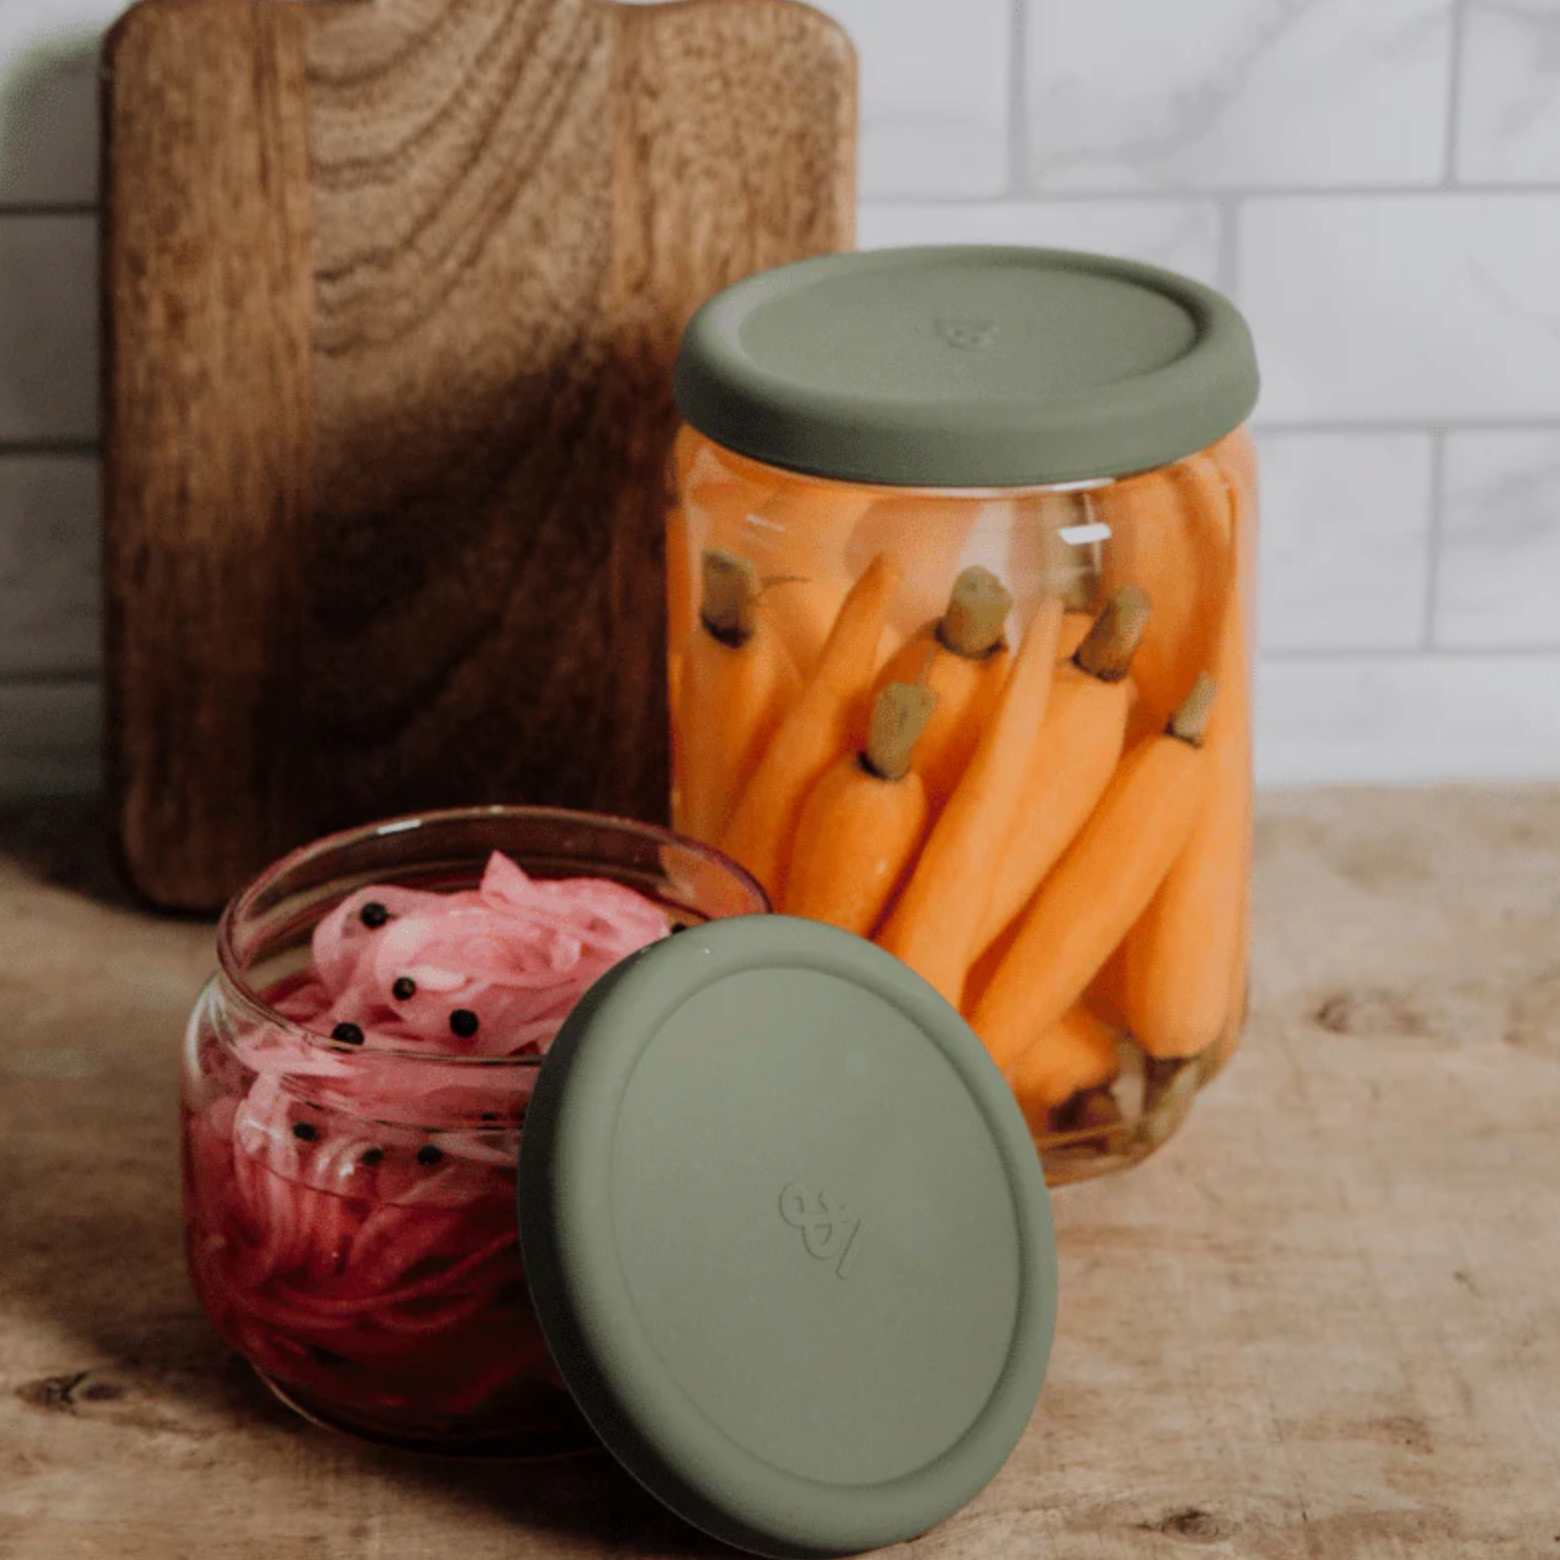 SEED & SPROUT BYRON PANTRY JAR SILICONE LIDS: PISTACHIO